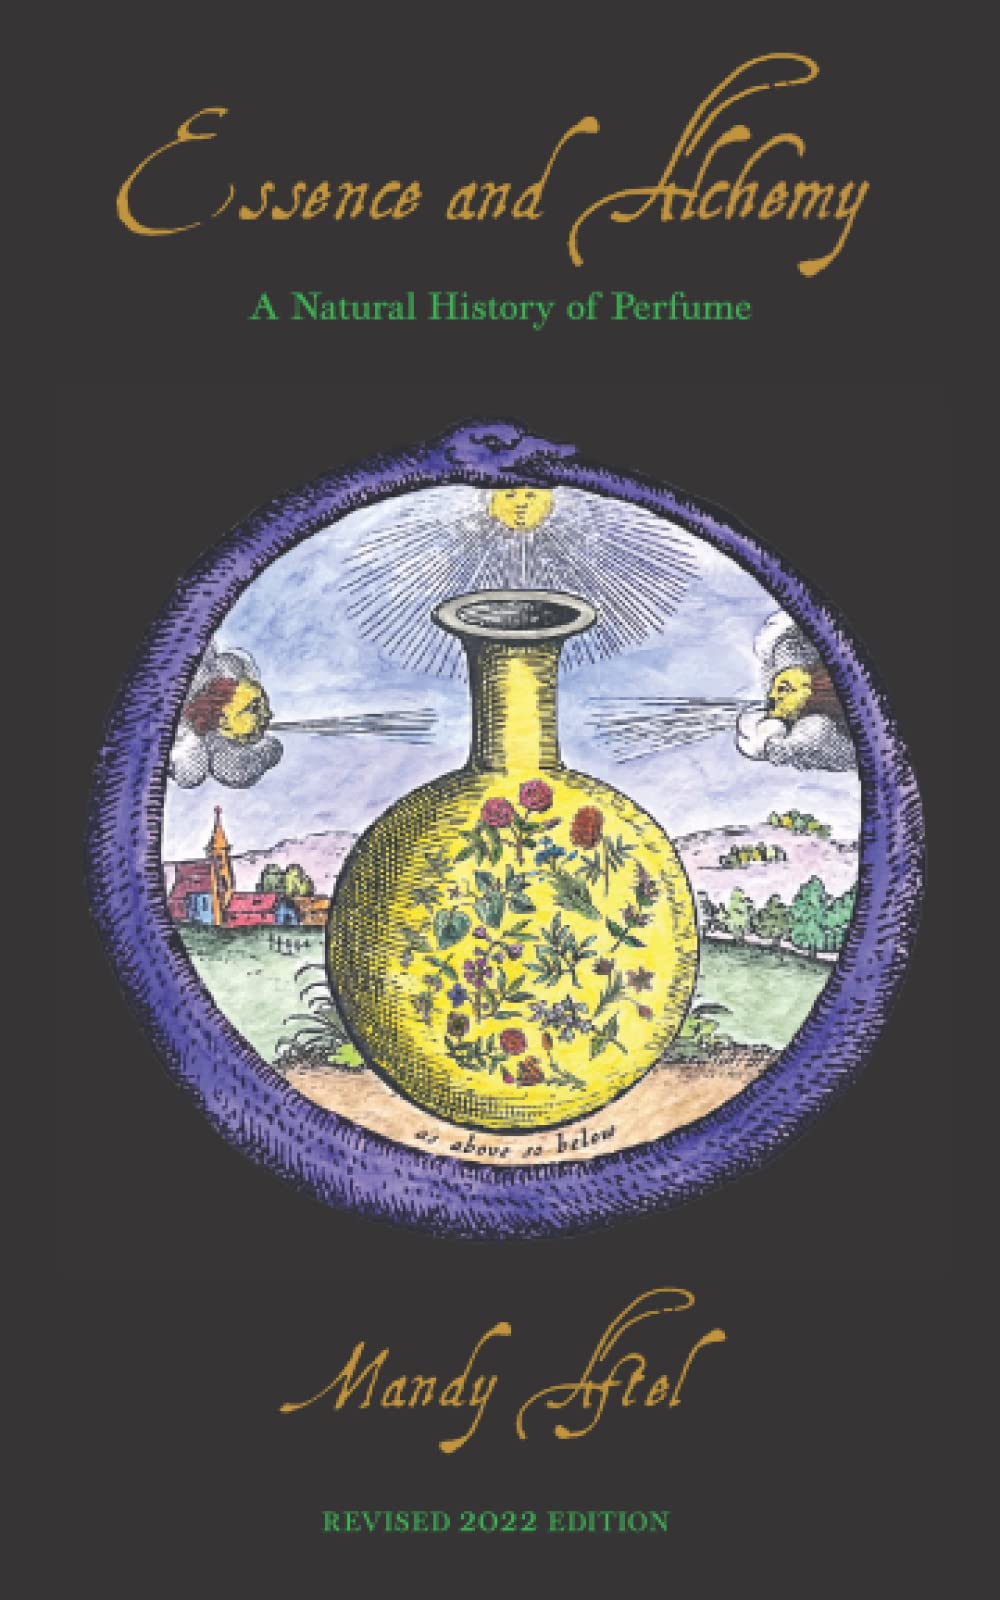 Books about Perfumery5